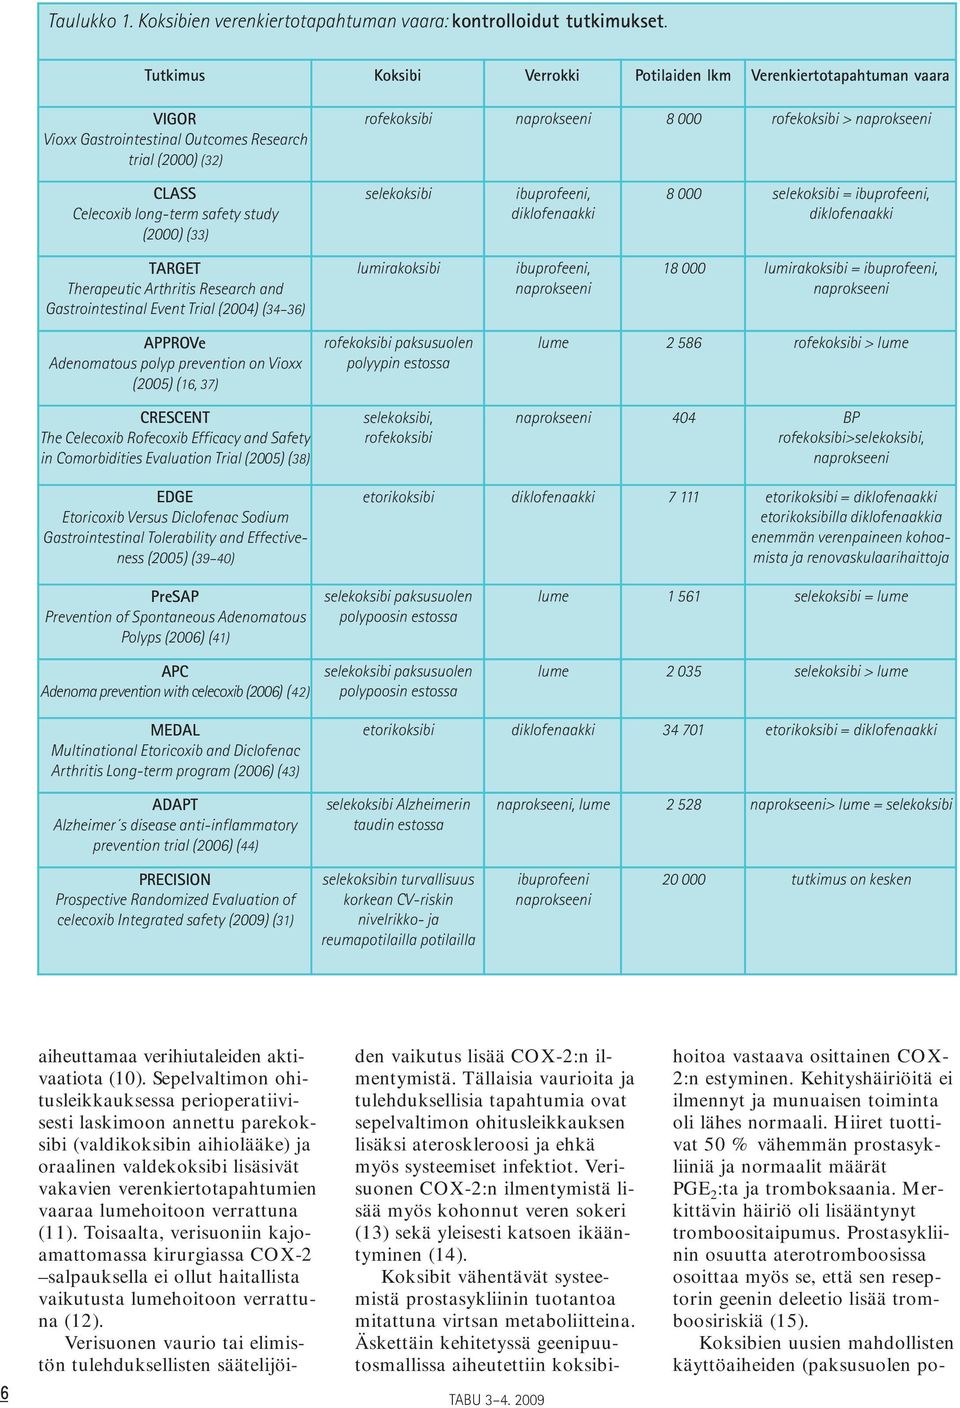 Celecoxib long-term safety study (2000) (33) selekoksibi ibuprofeeni, diklofenaakki 8 000 selekoksibi = ibuprofeeni, diklofenaakki TARGET Therapeutic Arthritis Research and Gastrointestinal Event